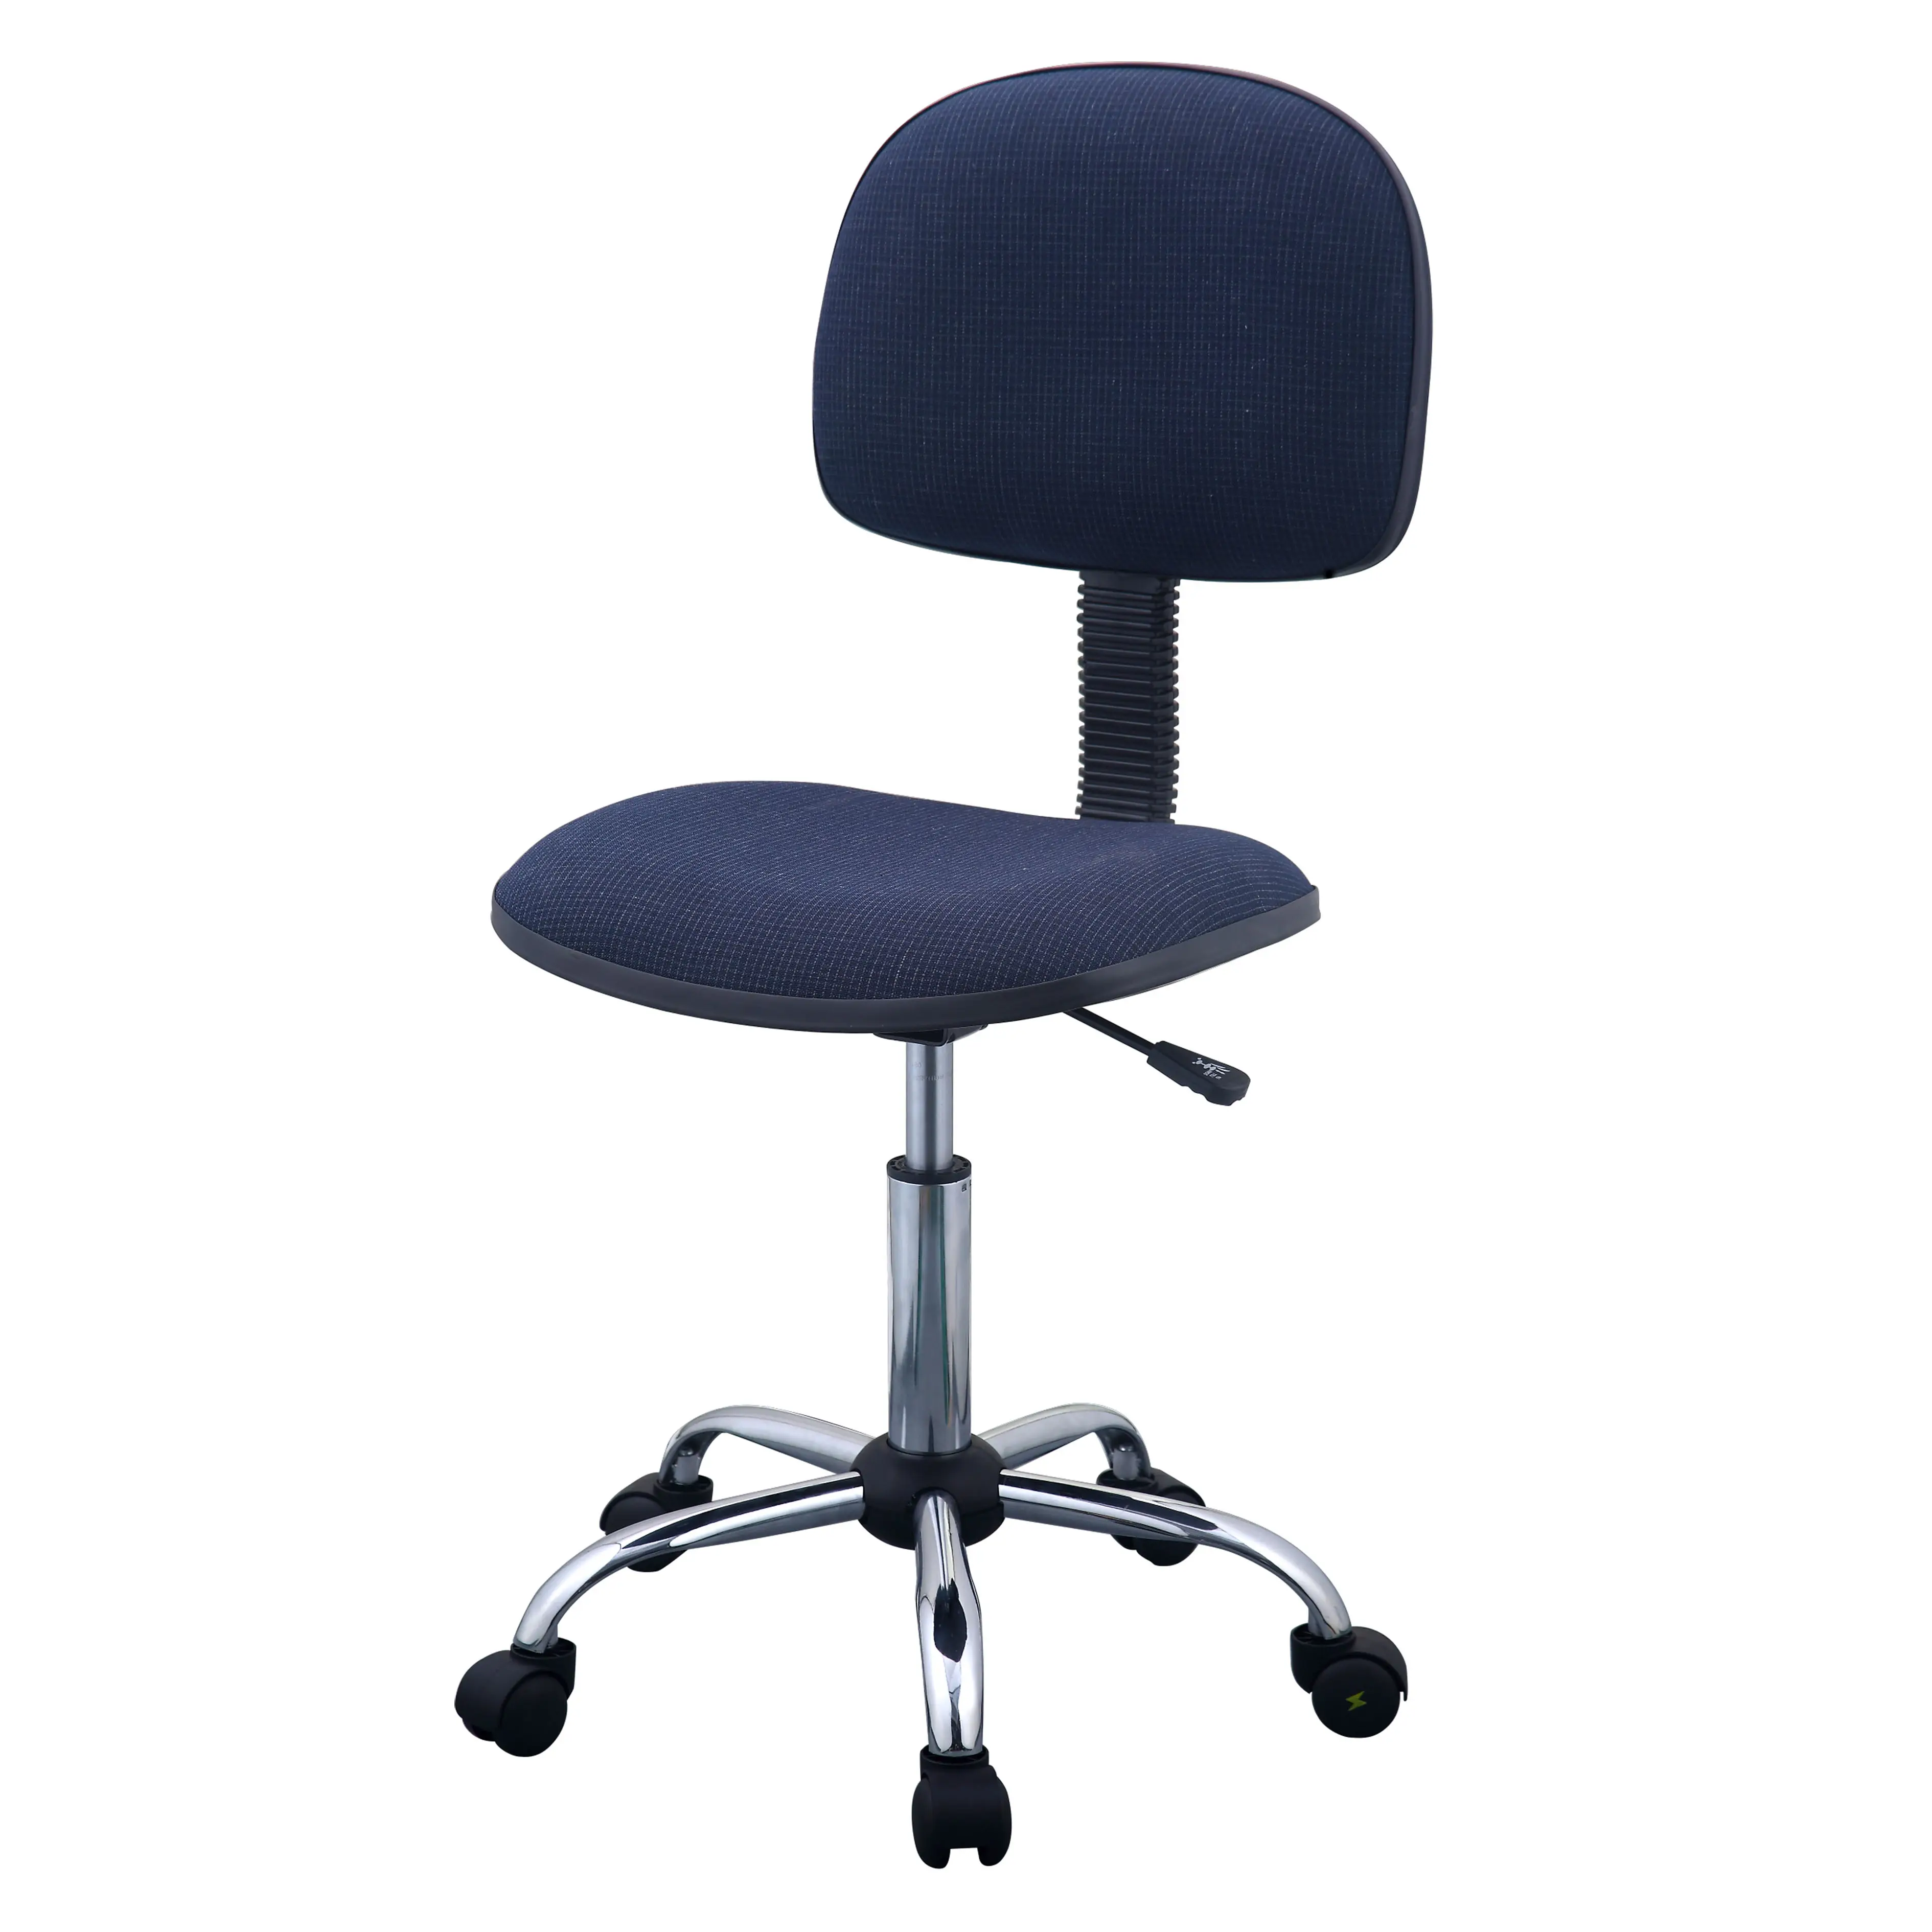 High quality Antistatic ESD fabric chair for cleanroom